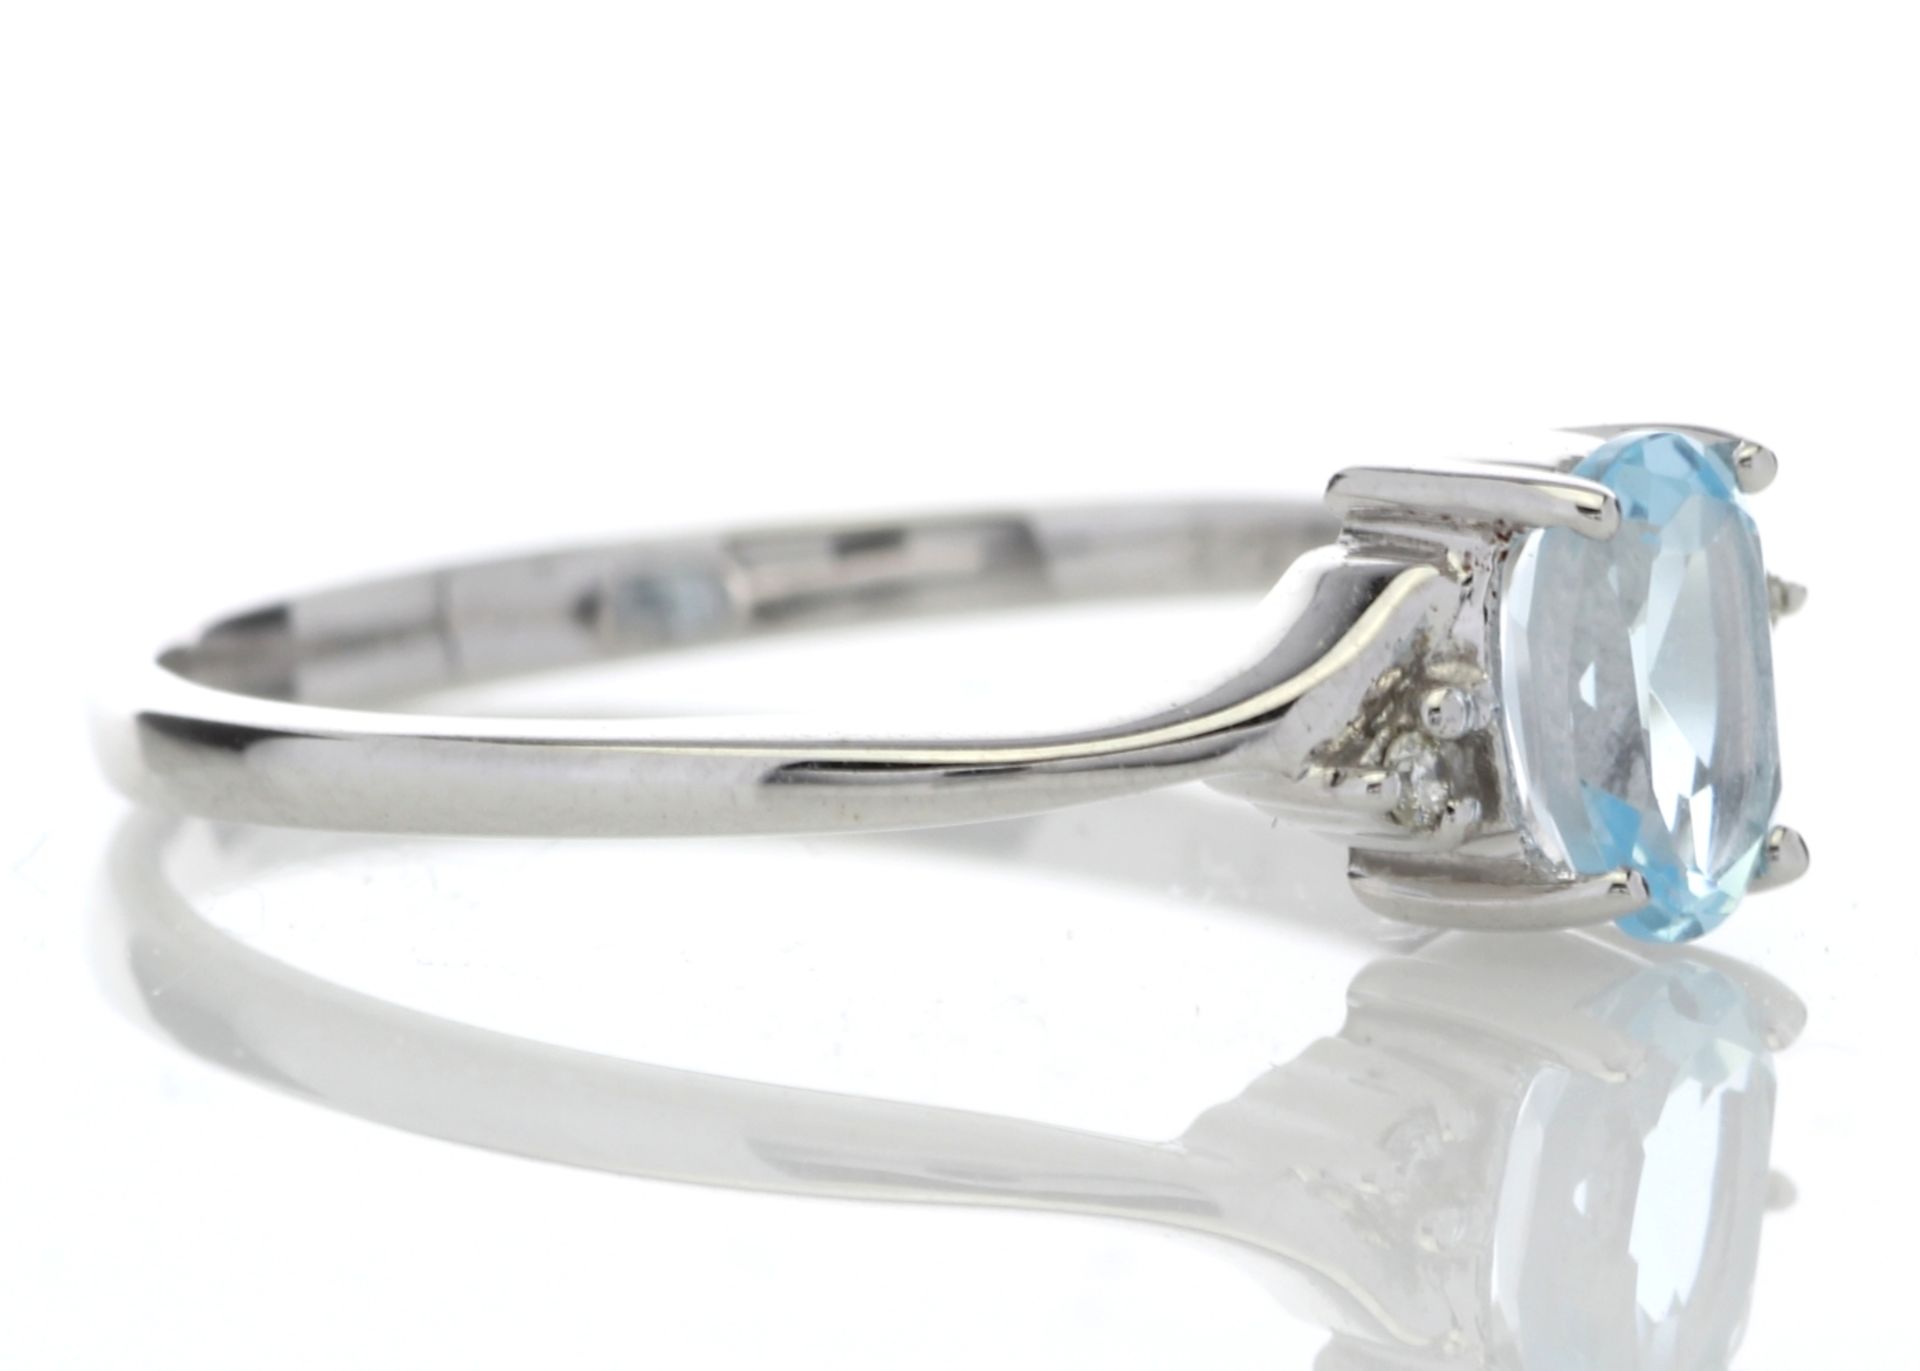 9ct White Gold Diamond and Oval Shape Blue Topaz Ring 0.01 Carats - Valued by AGI £650.00 - 9ct - Image 8 of 8